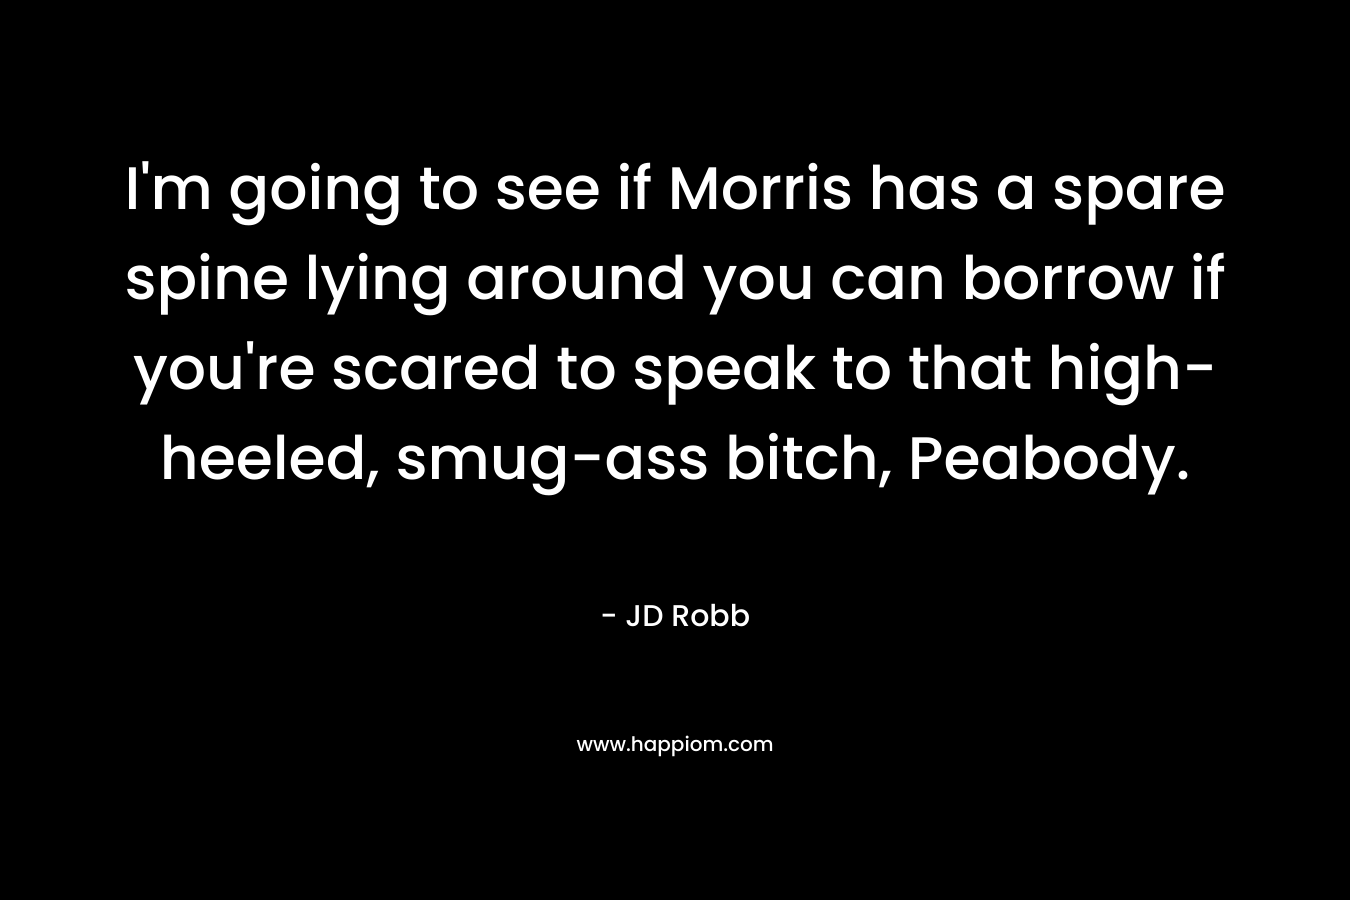 I’m going to see if Morris has a spare spine lying around you can borrow if you’re scared to speak to that high-heeled, smug-ass bitch, Peabody. – JD Robb